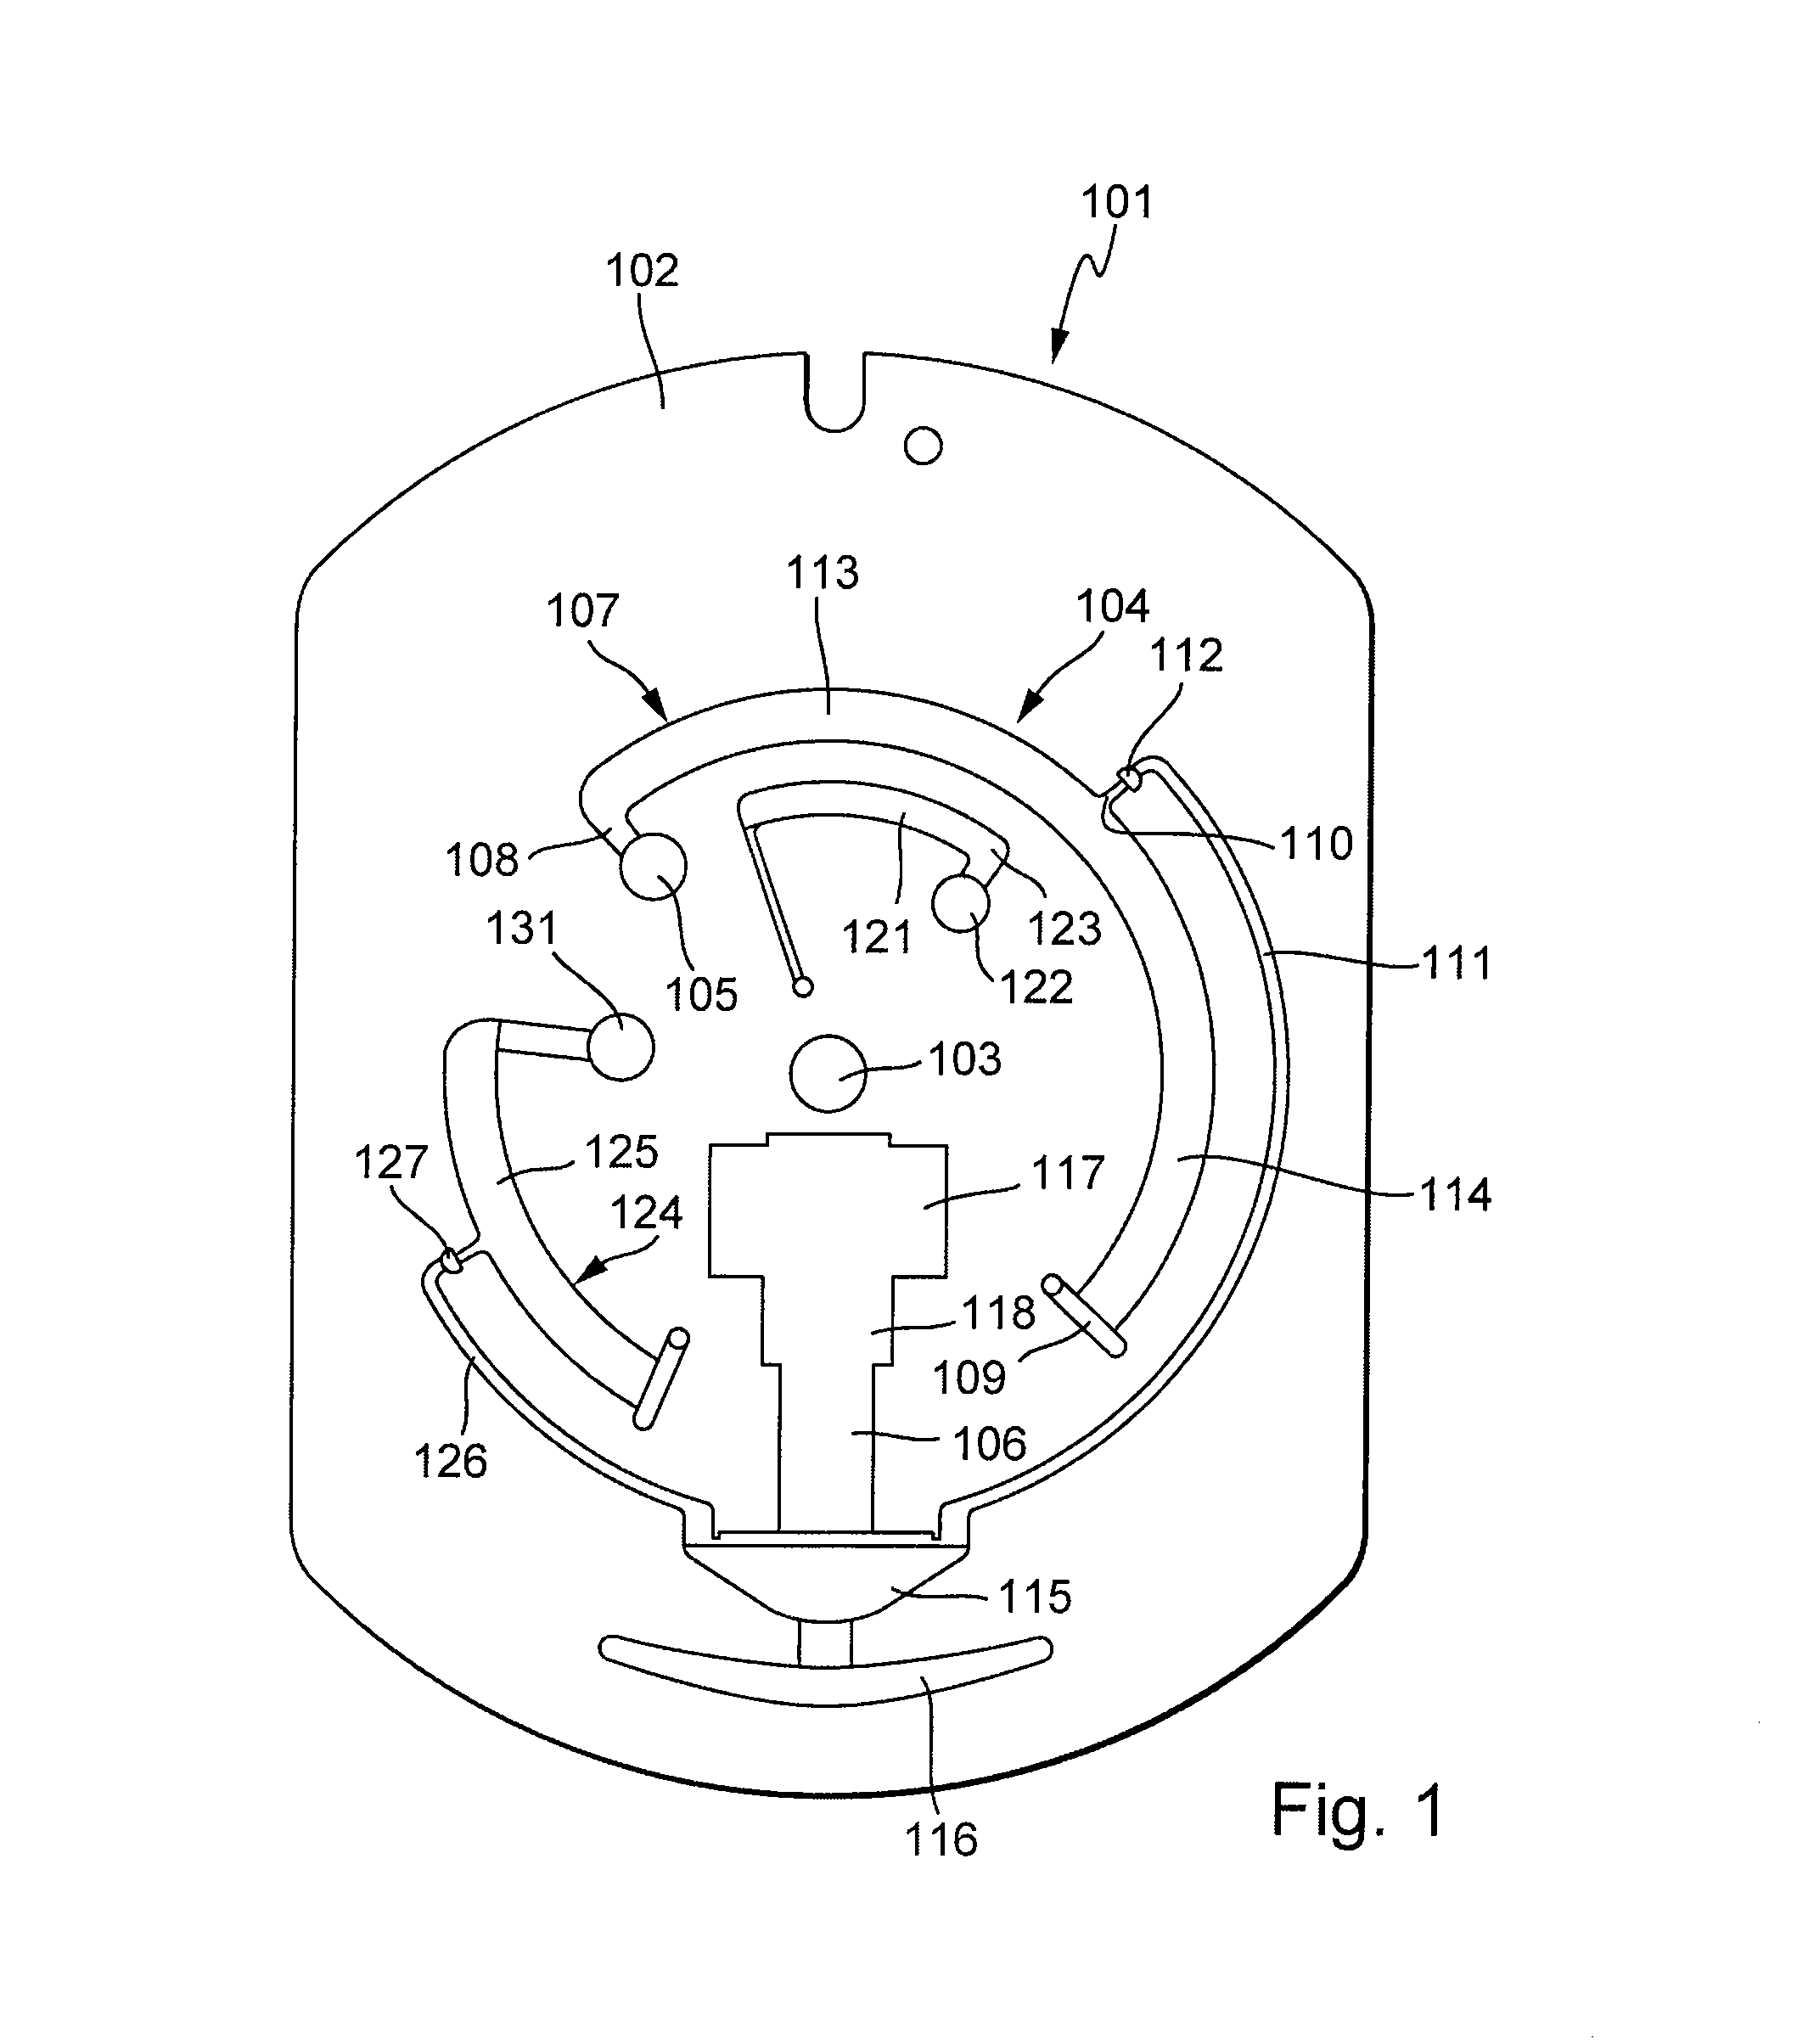 Microfluidic element for thoroughly mixing a liquid with a reagent